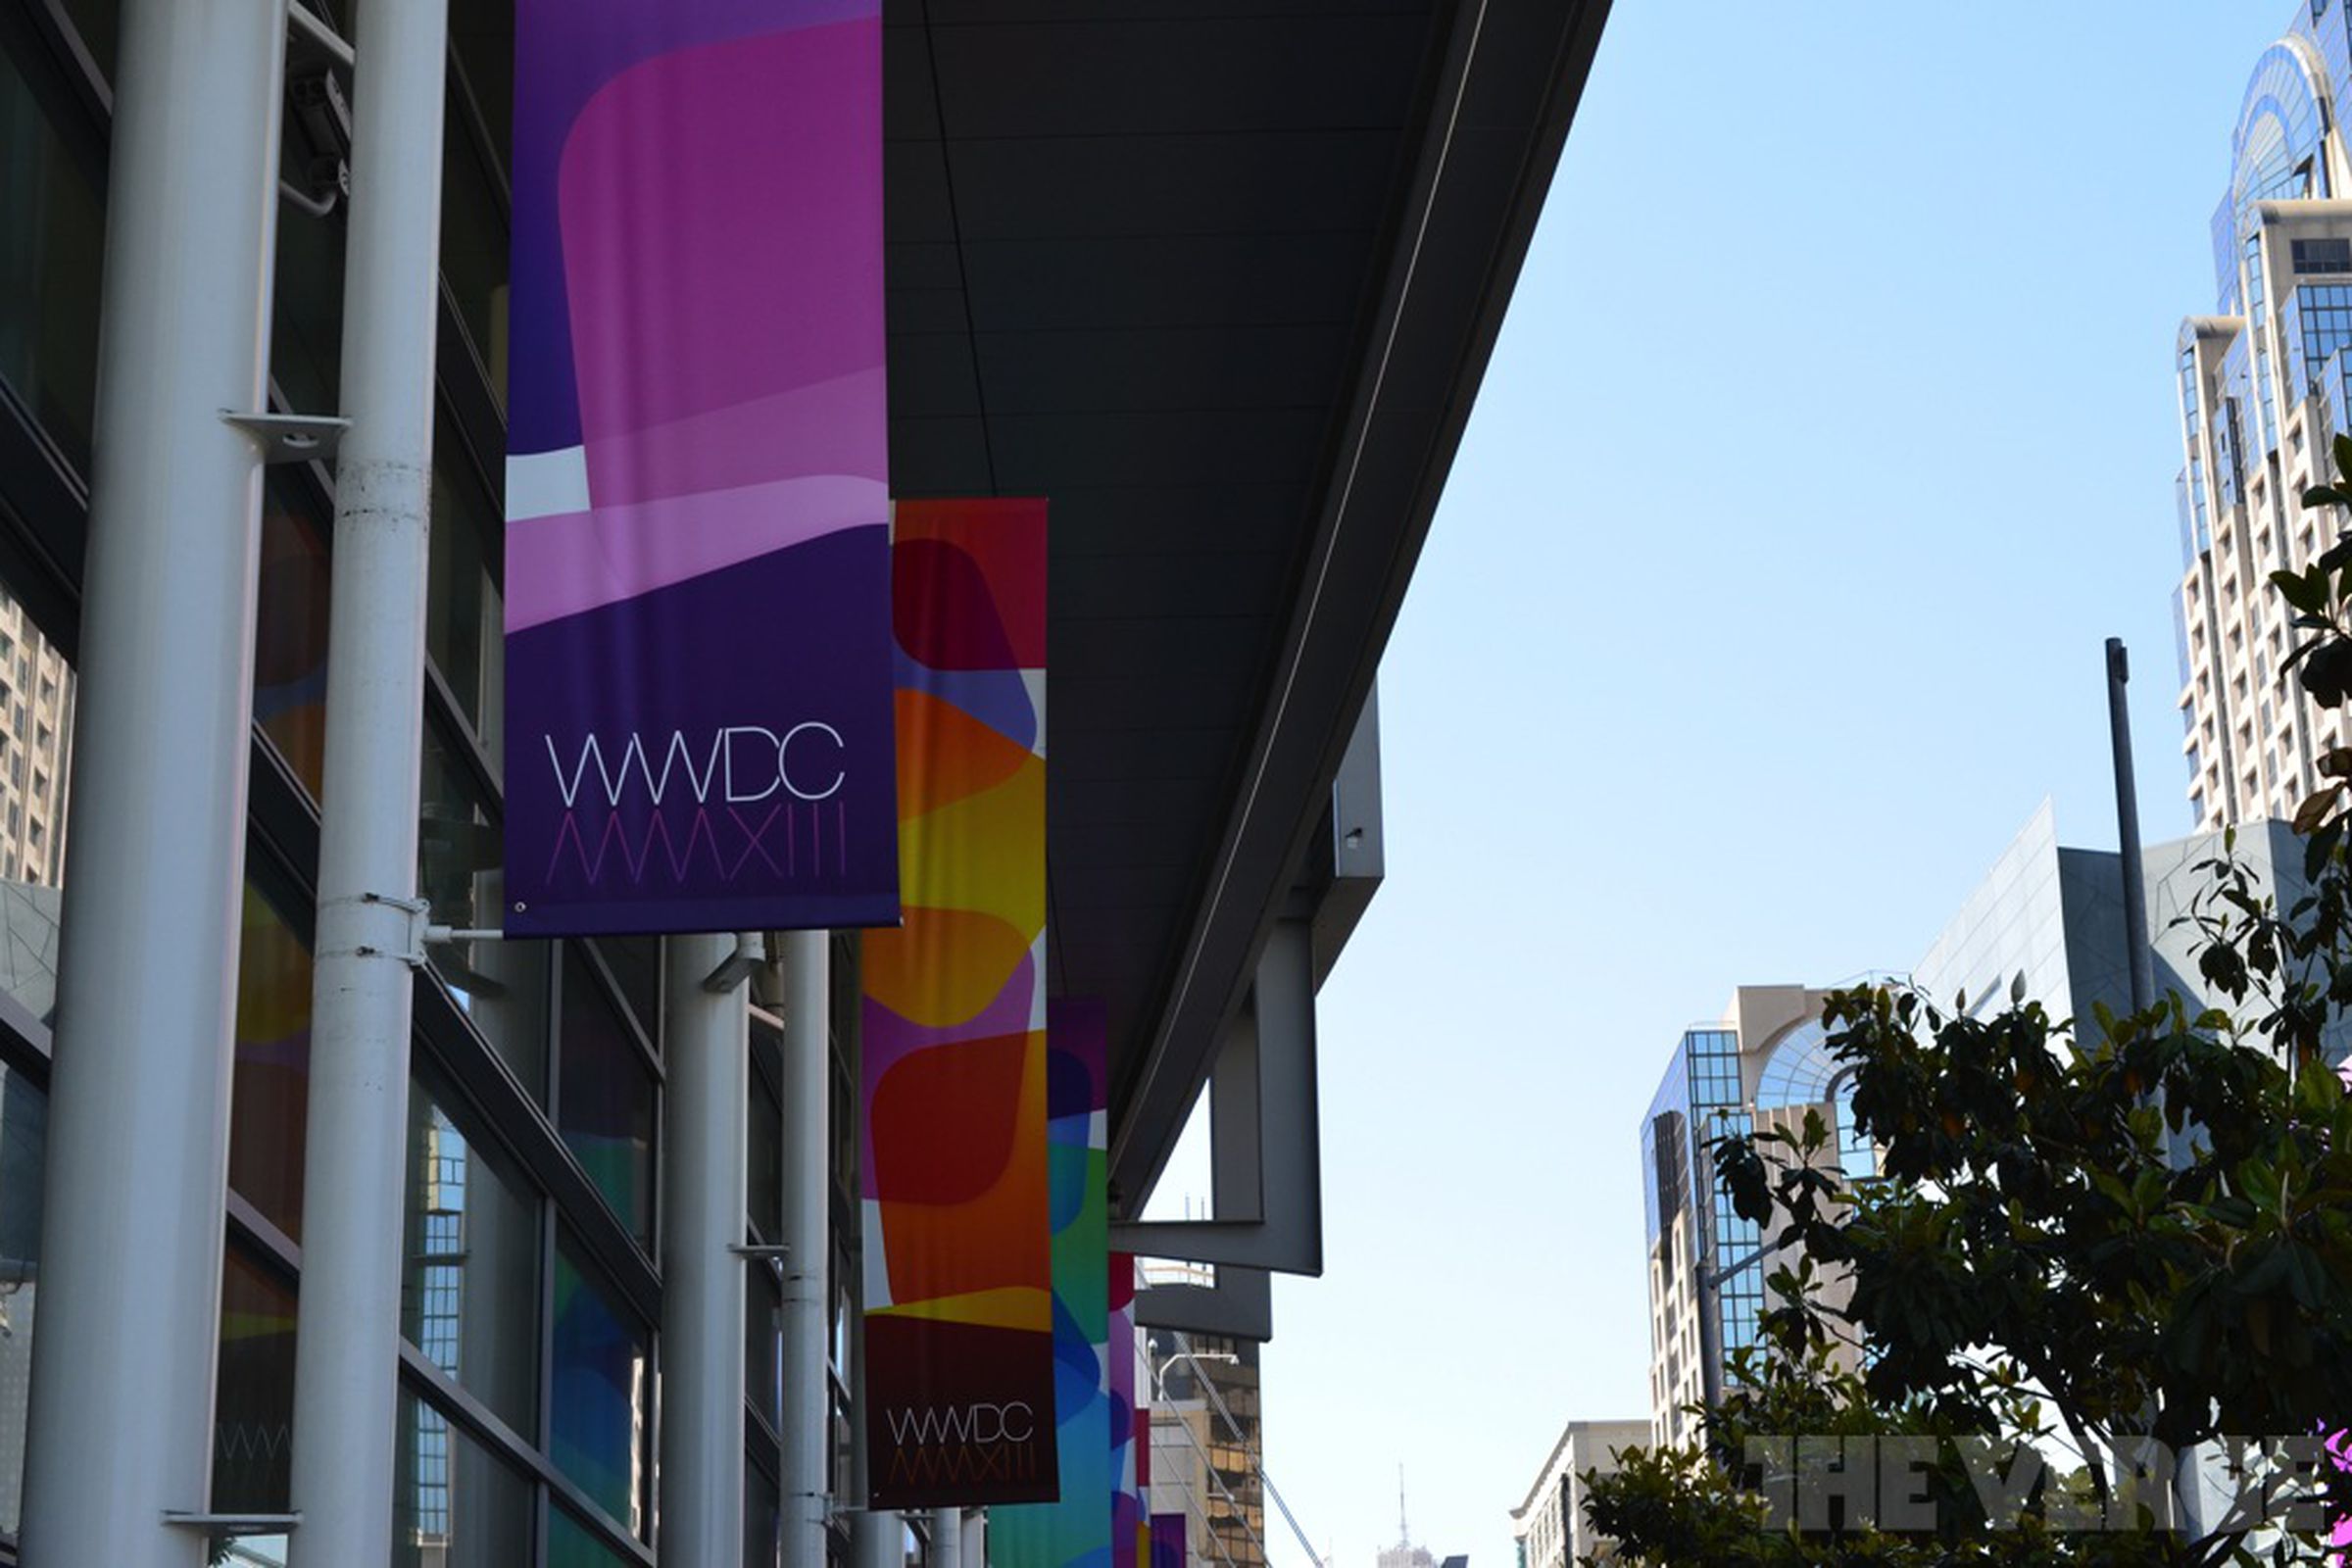 WWDC Stock images